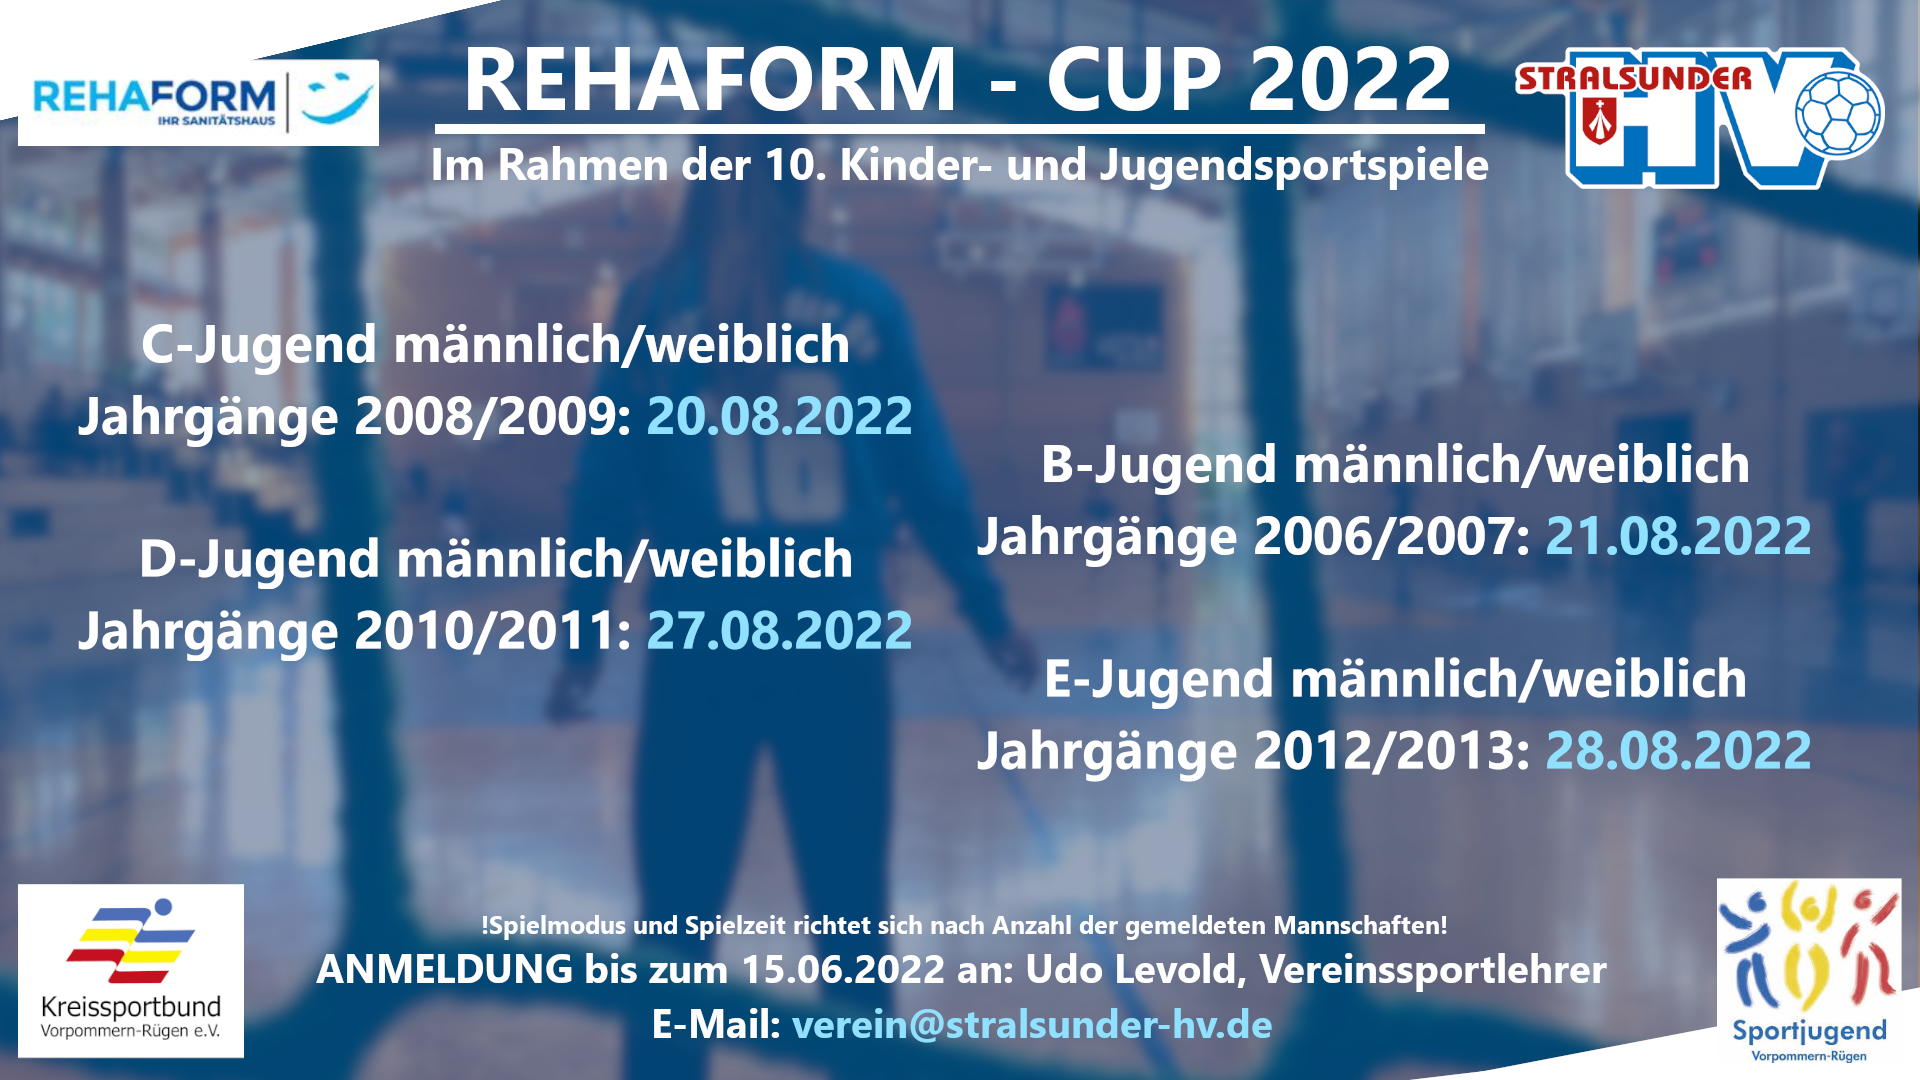 You are currently viewing REHAFORM-CUP 2022